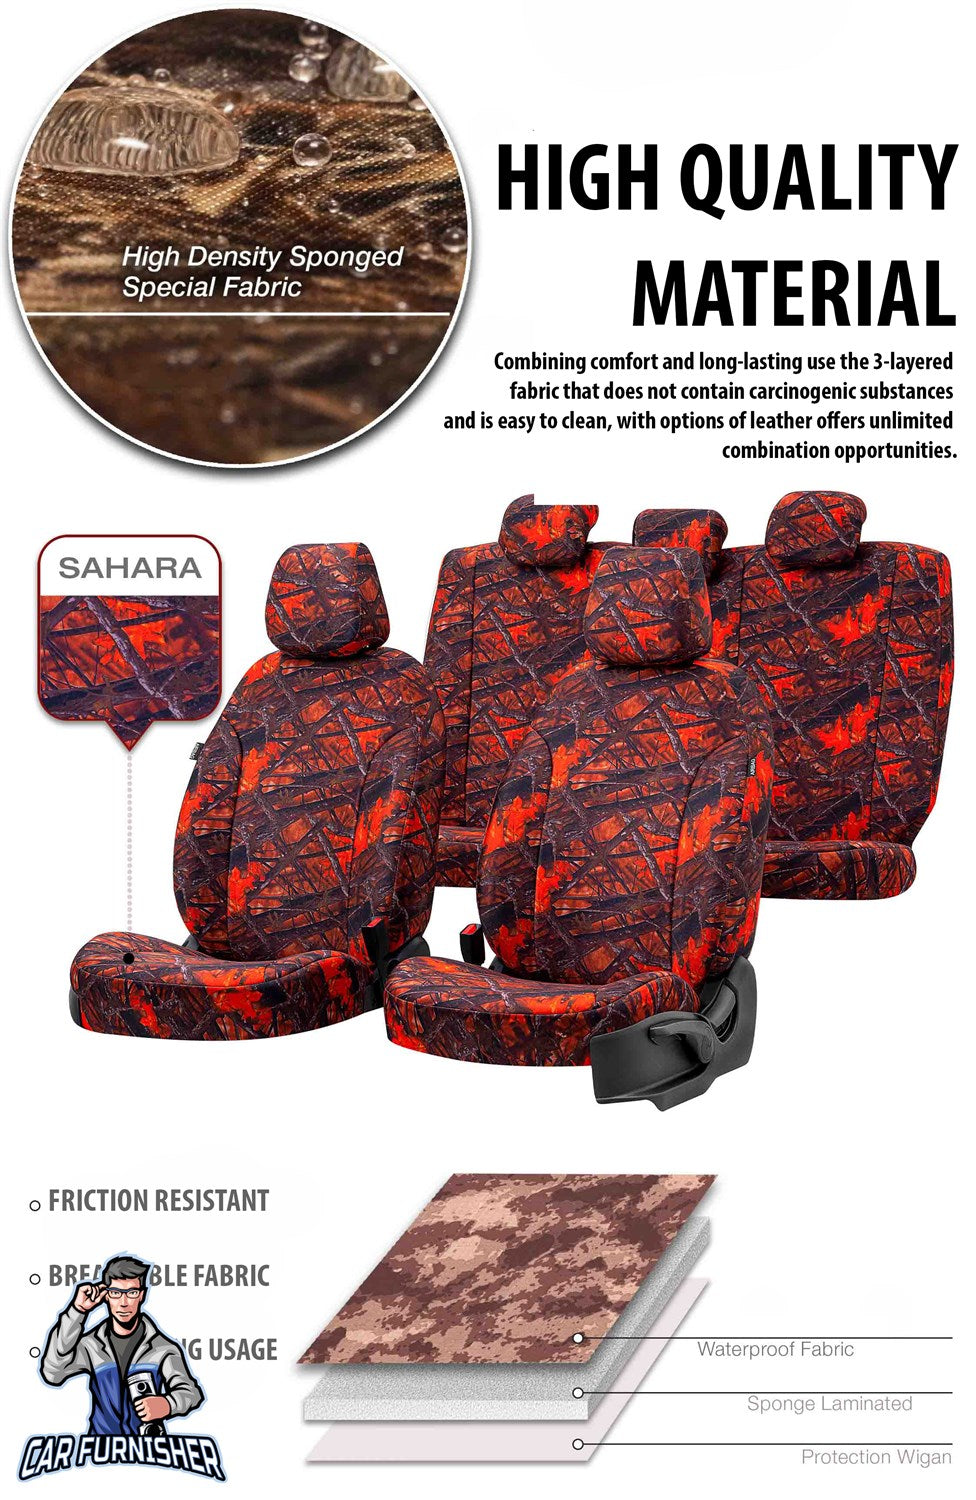 Renault Scenic Car Seat Covers 1997-2016 Camouflage Design Everest Camo Full Set (5 Seats + Handrest) Fabric